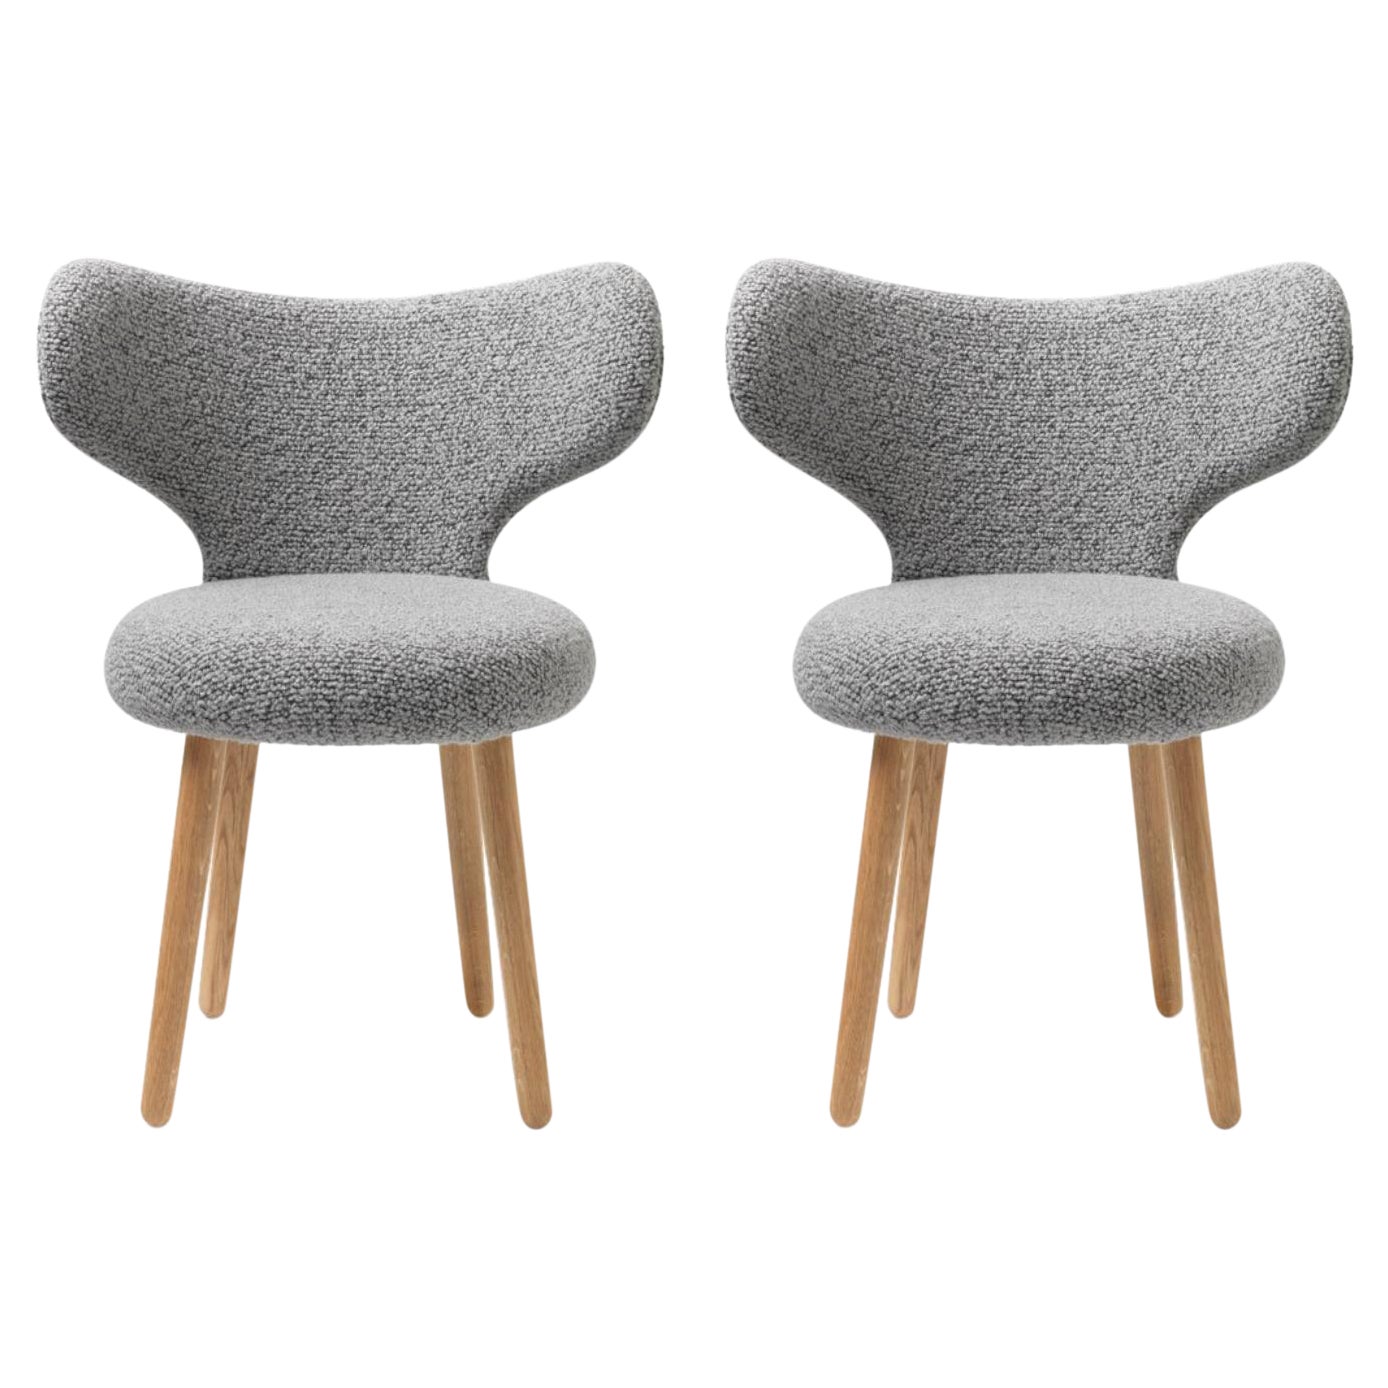 Set of 2 BUTE/Storr WNG Chairs by Mazo Design For Sale